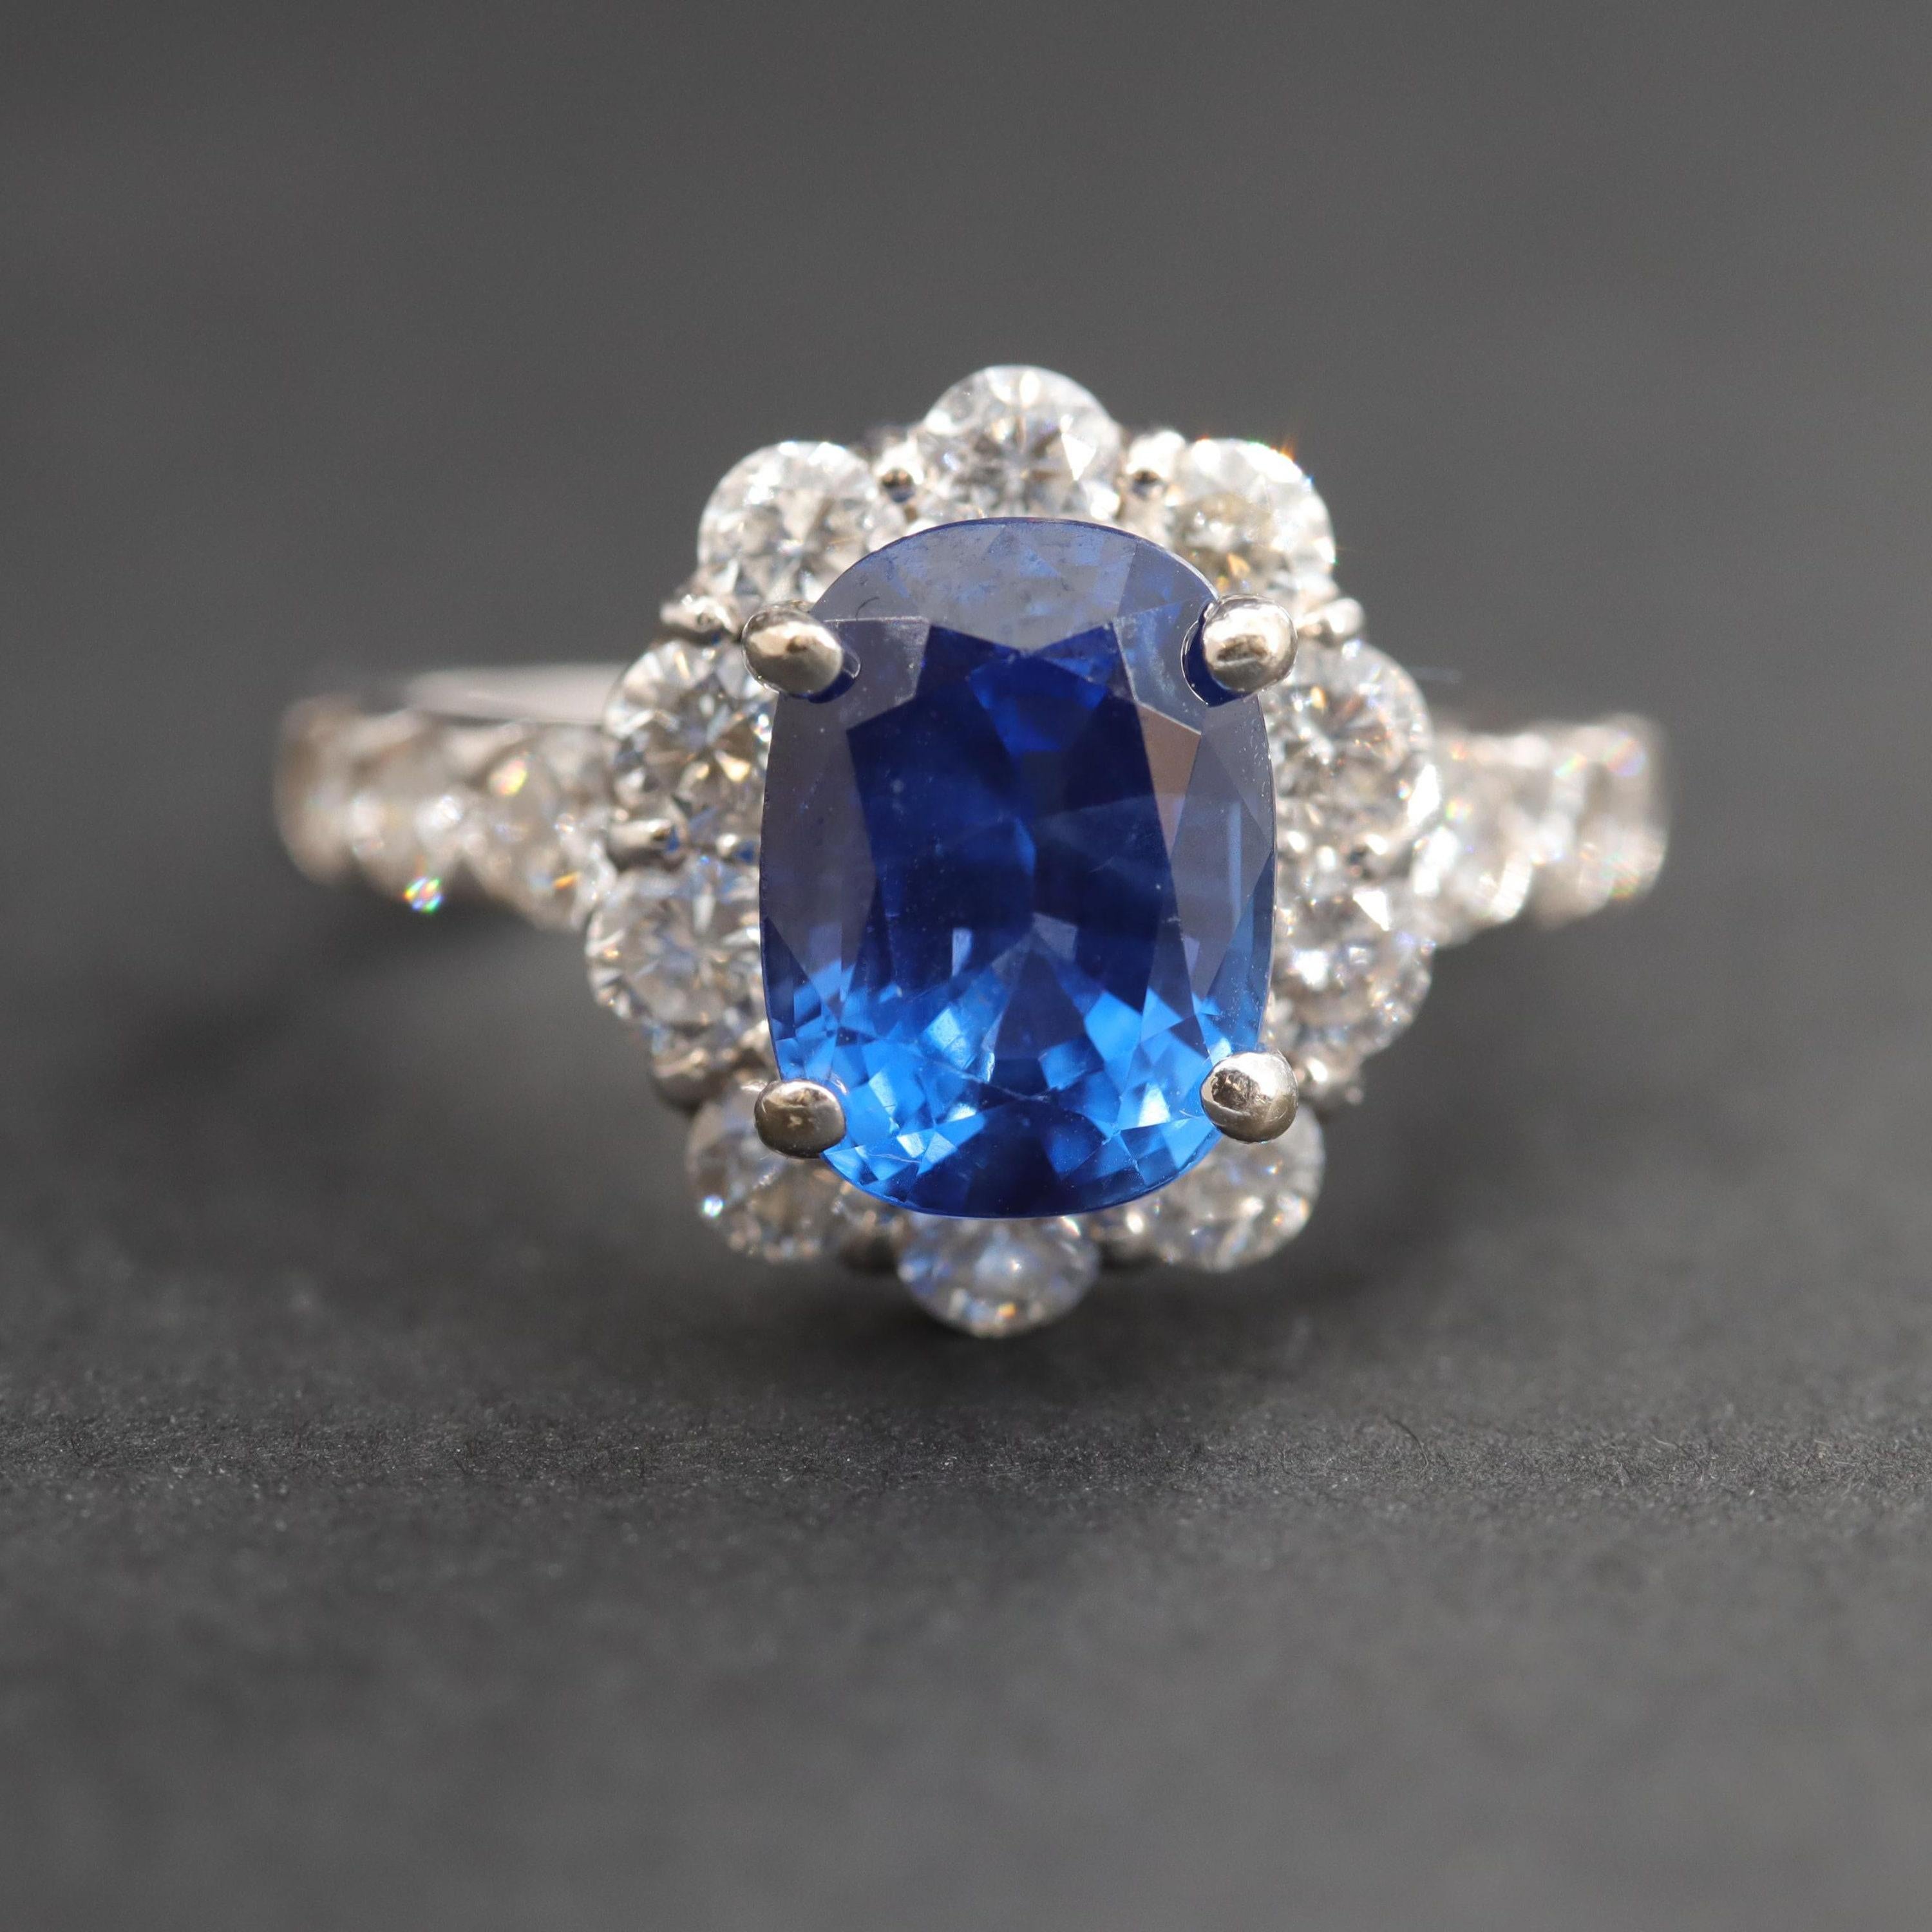 For Sale:  2.9 Carat Sapphire and Diamond Engagement Ring White Gold Sapphire Cocktail Ring 5